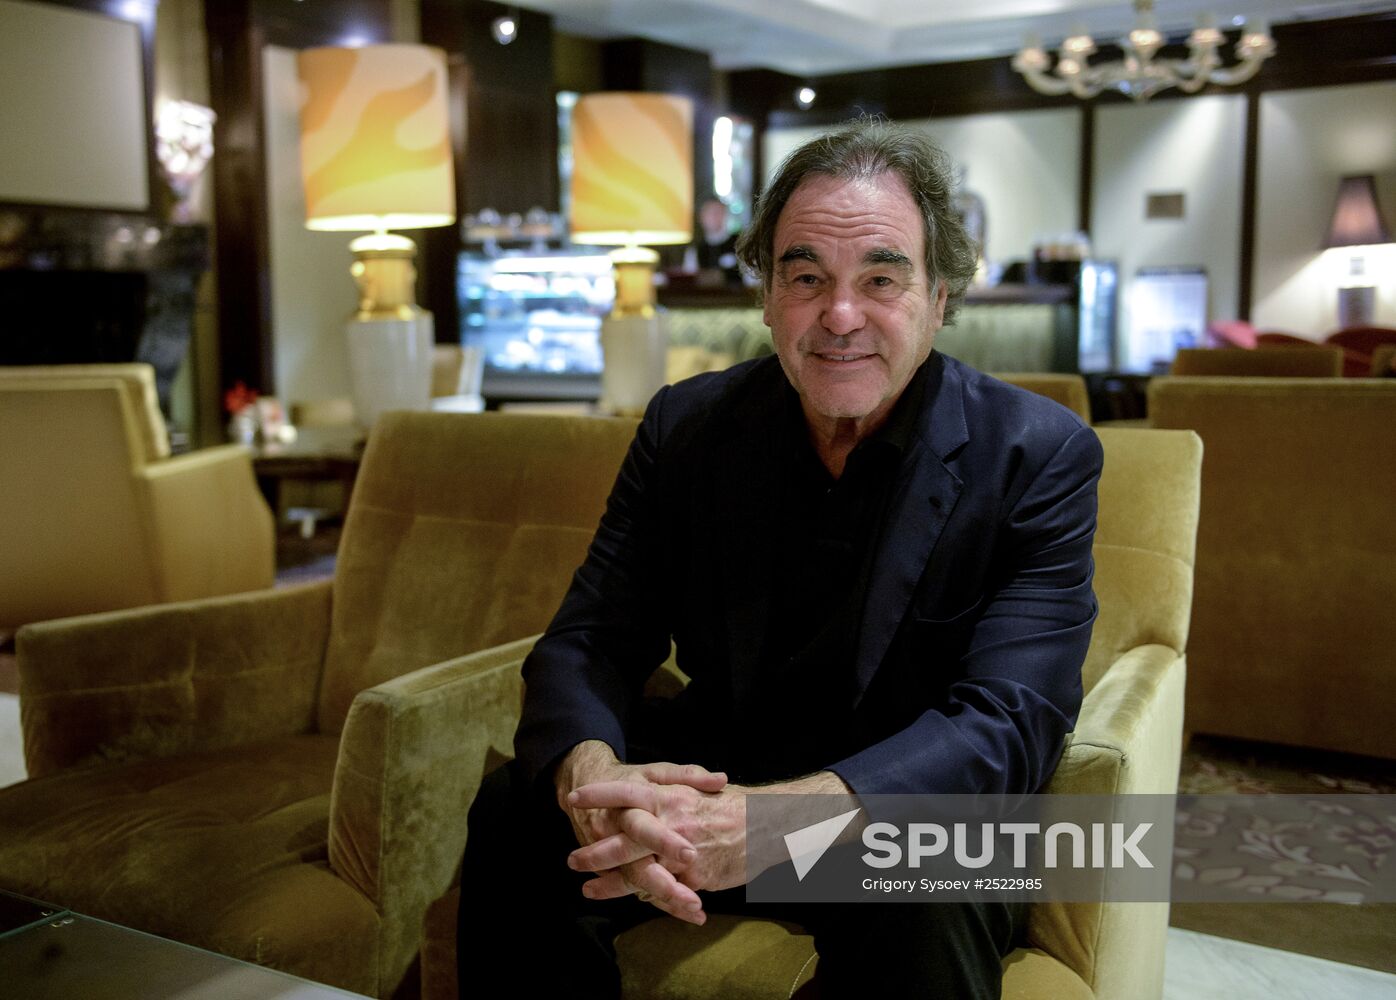 Interview with Oliver Stone